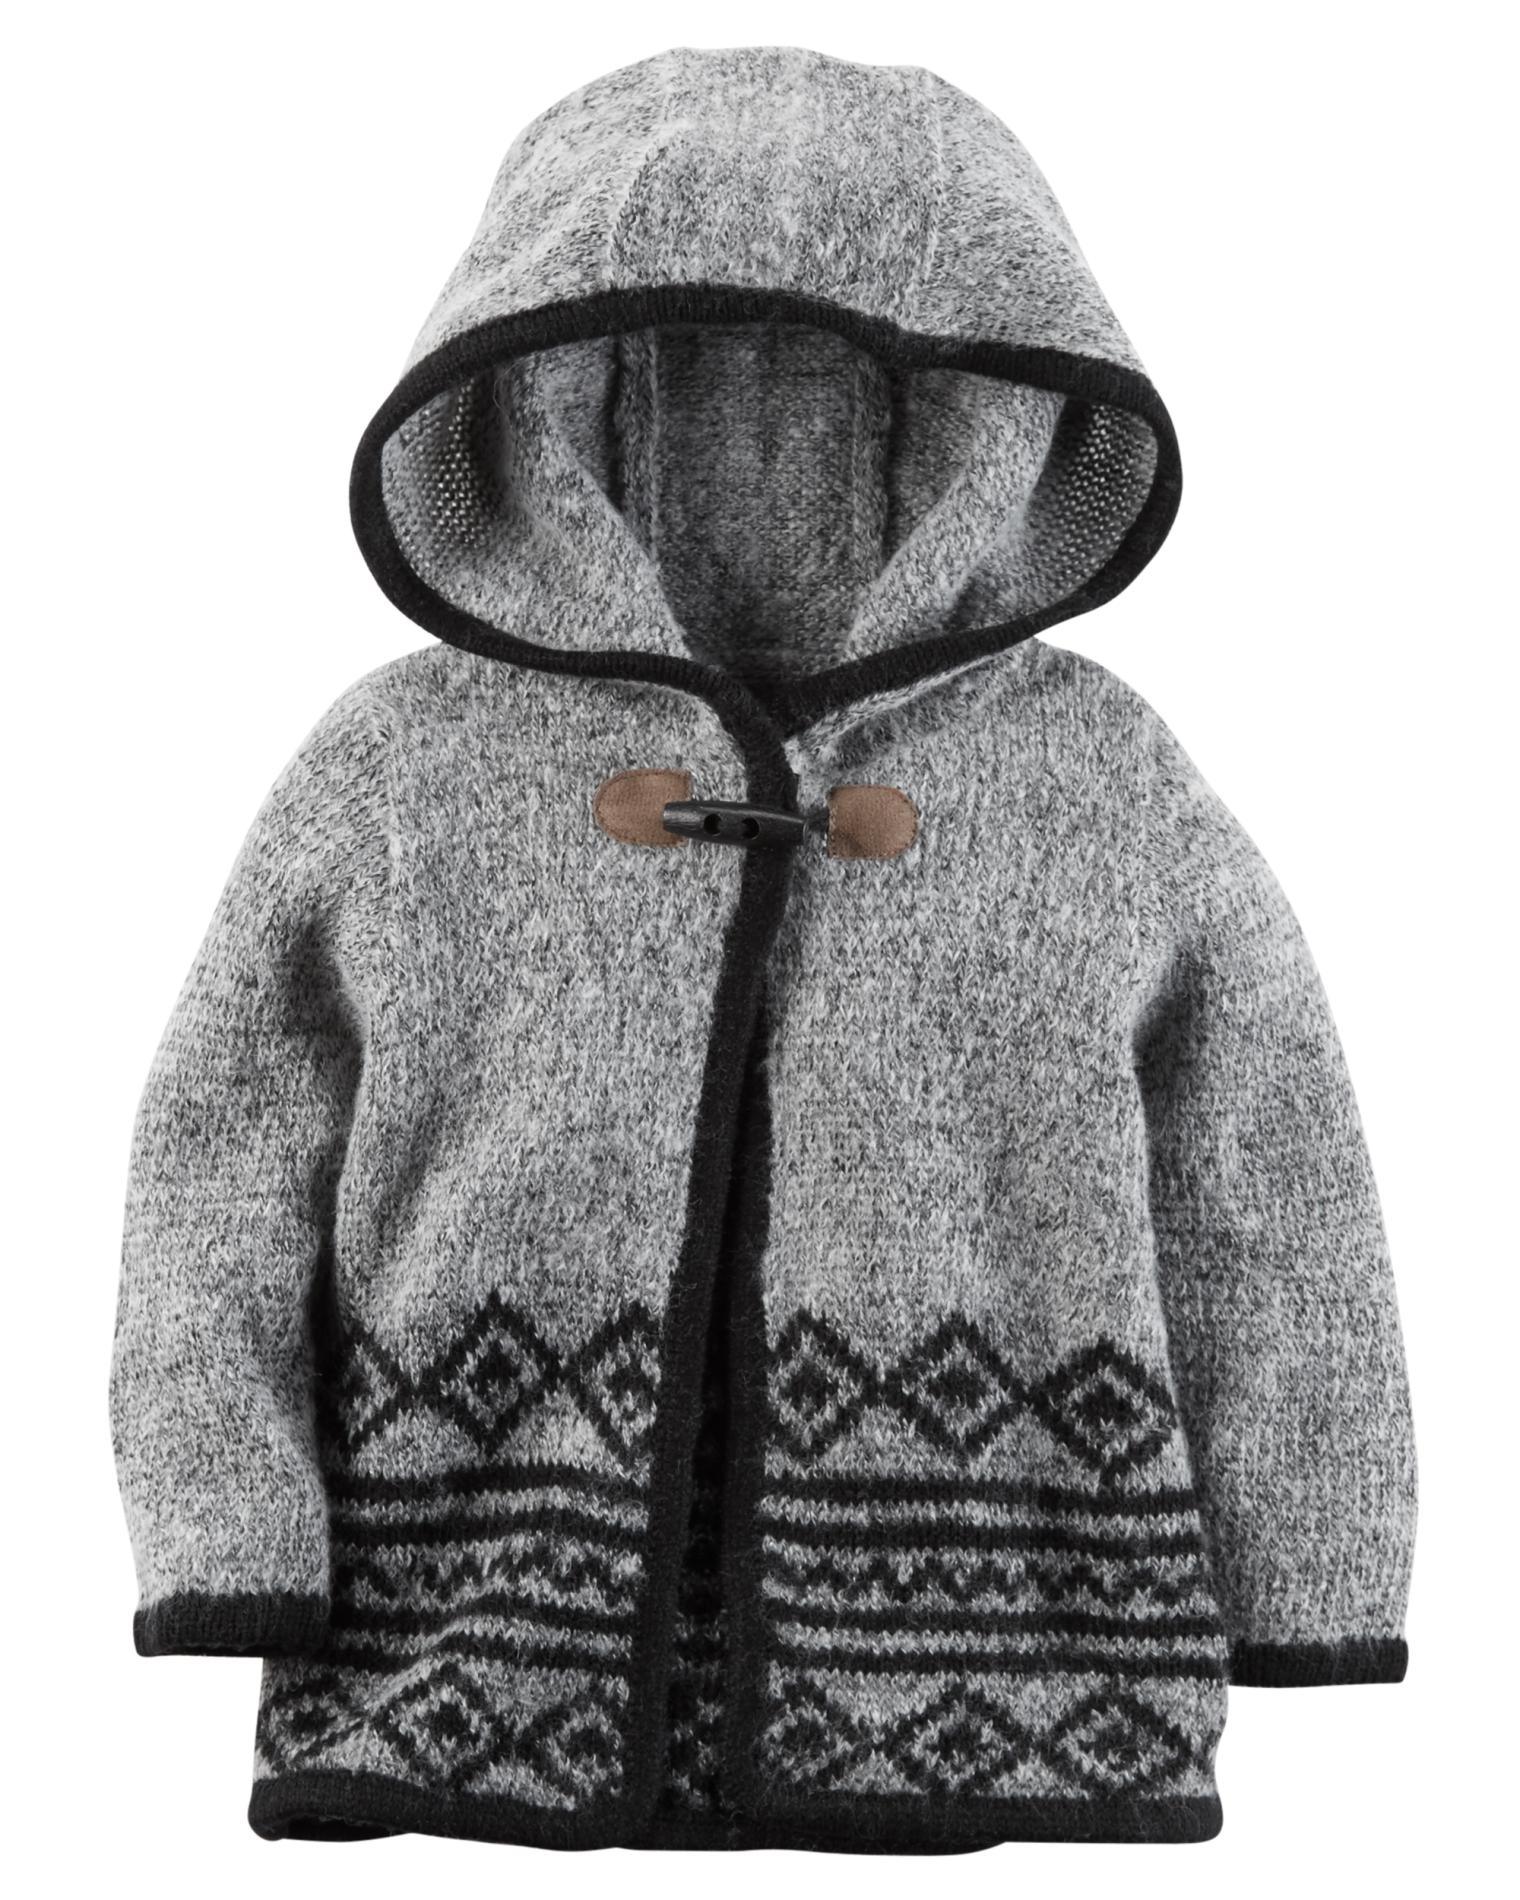 Carter's Newborn & Infant Girls' Hooded Toggle Sweater - Tribal